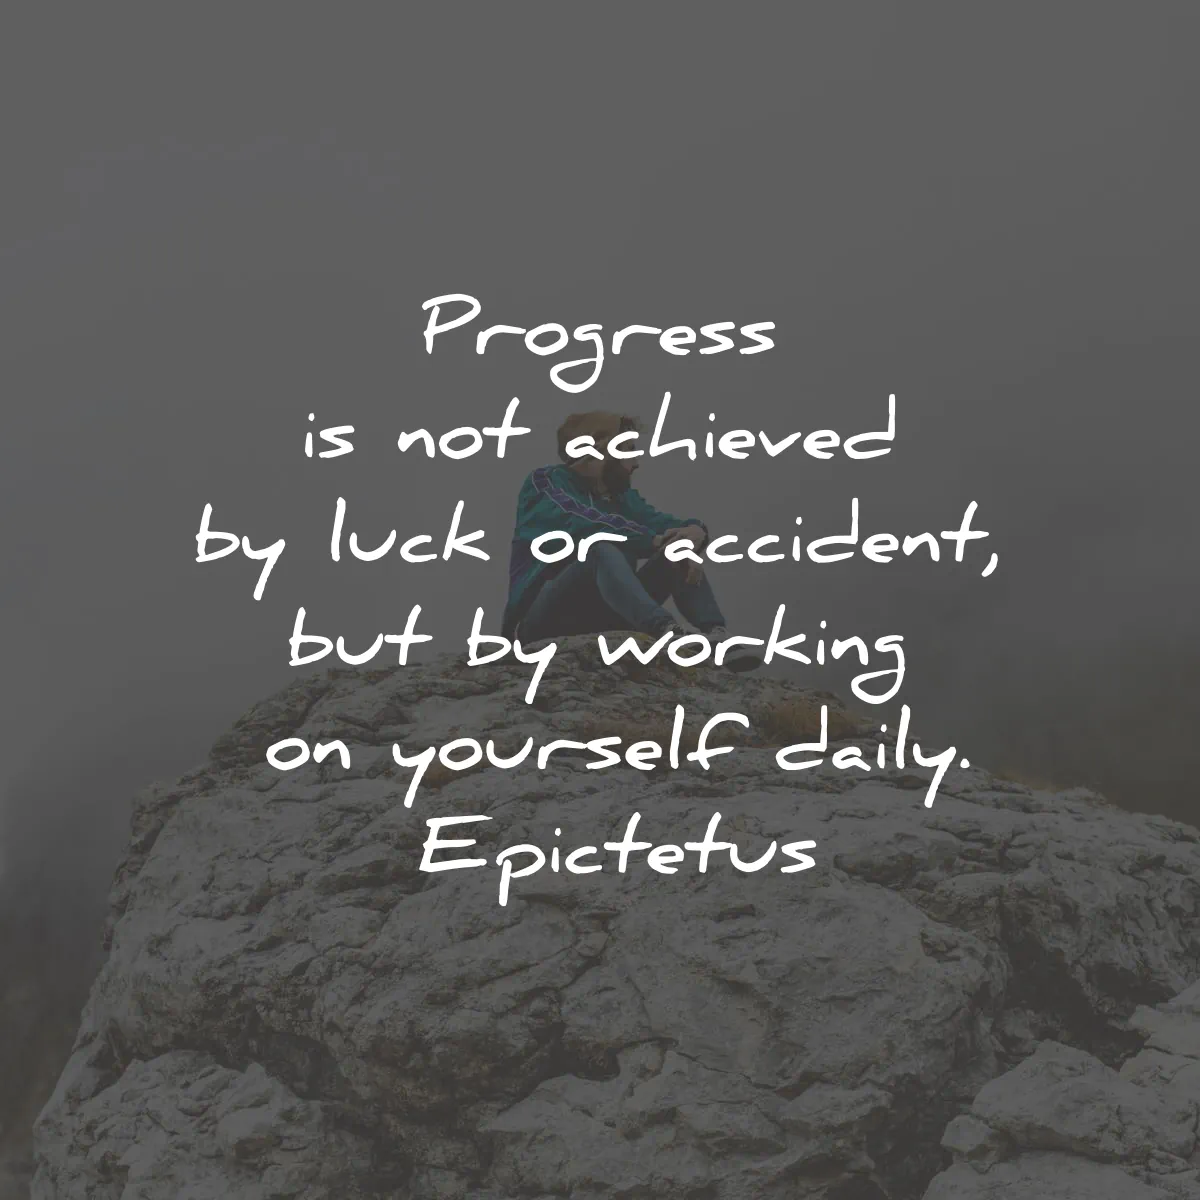 epictetus quotes progress achieved luck accident working daily wisdom